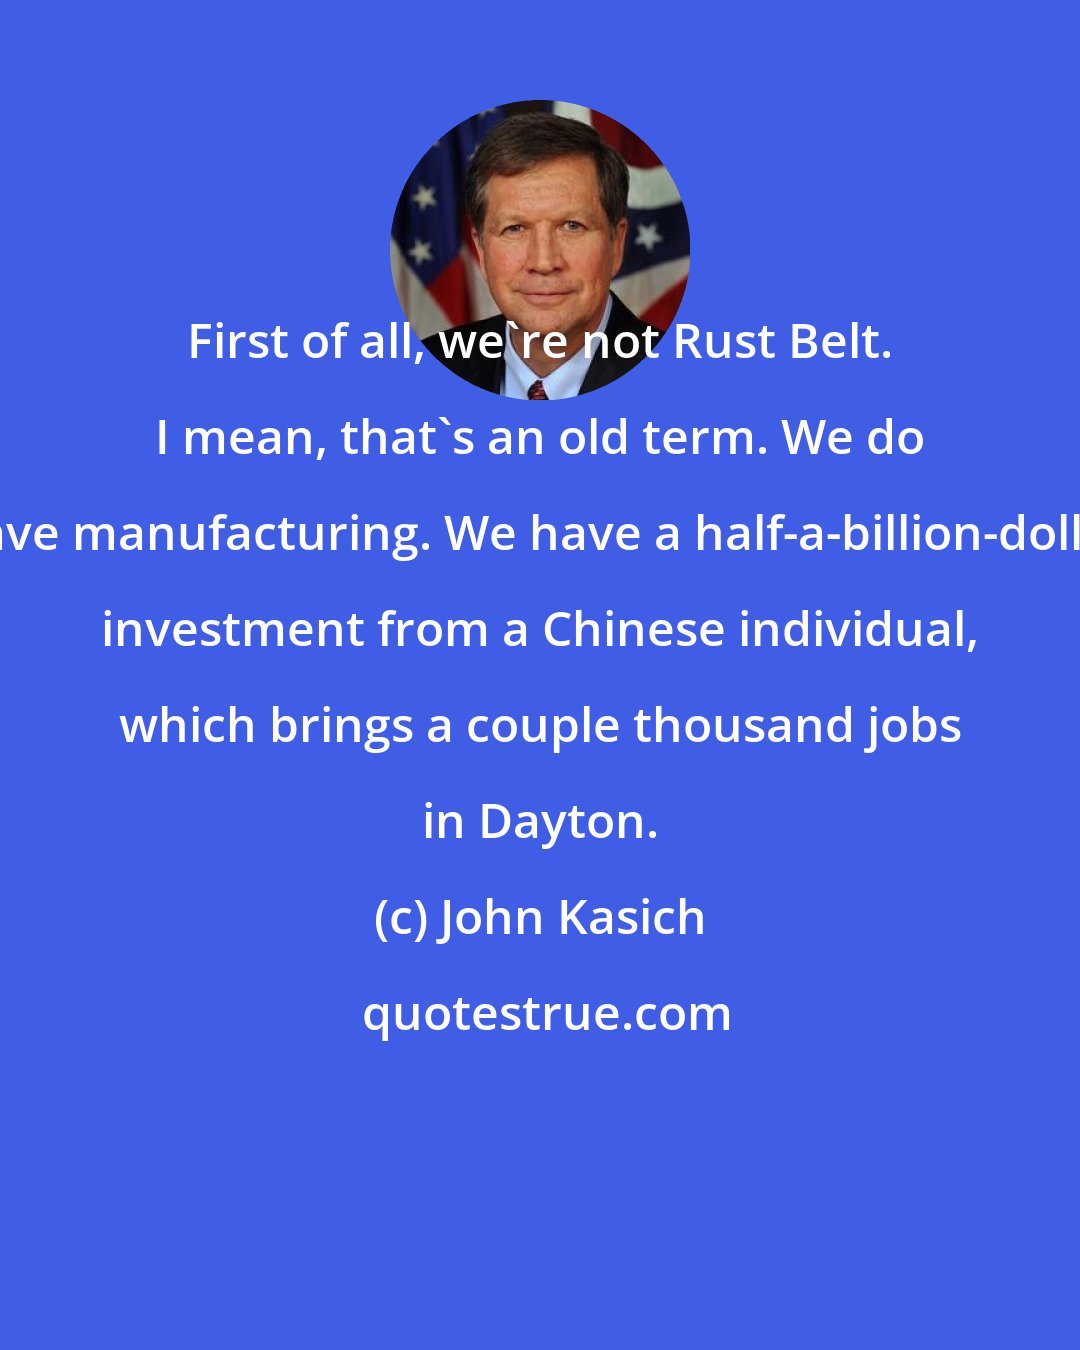 John Kasich: First of all, we're not Rust Belt. I mean, that's an old term. We do have manufacturing. We have a half-a-billion-dollar investment from a Chinese individual, which brings a couple thousand jobs in Dayton.